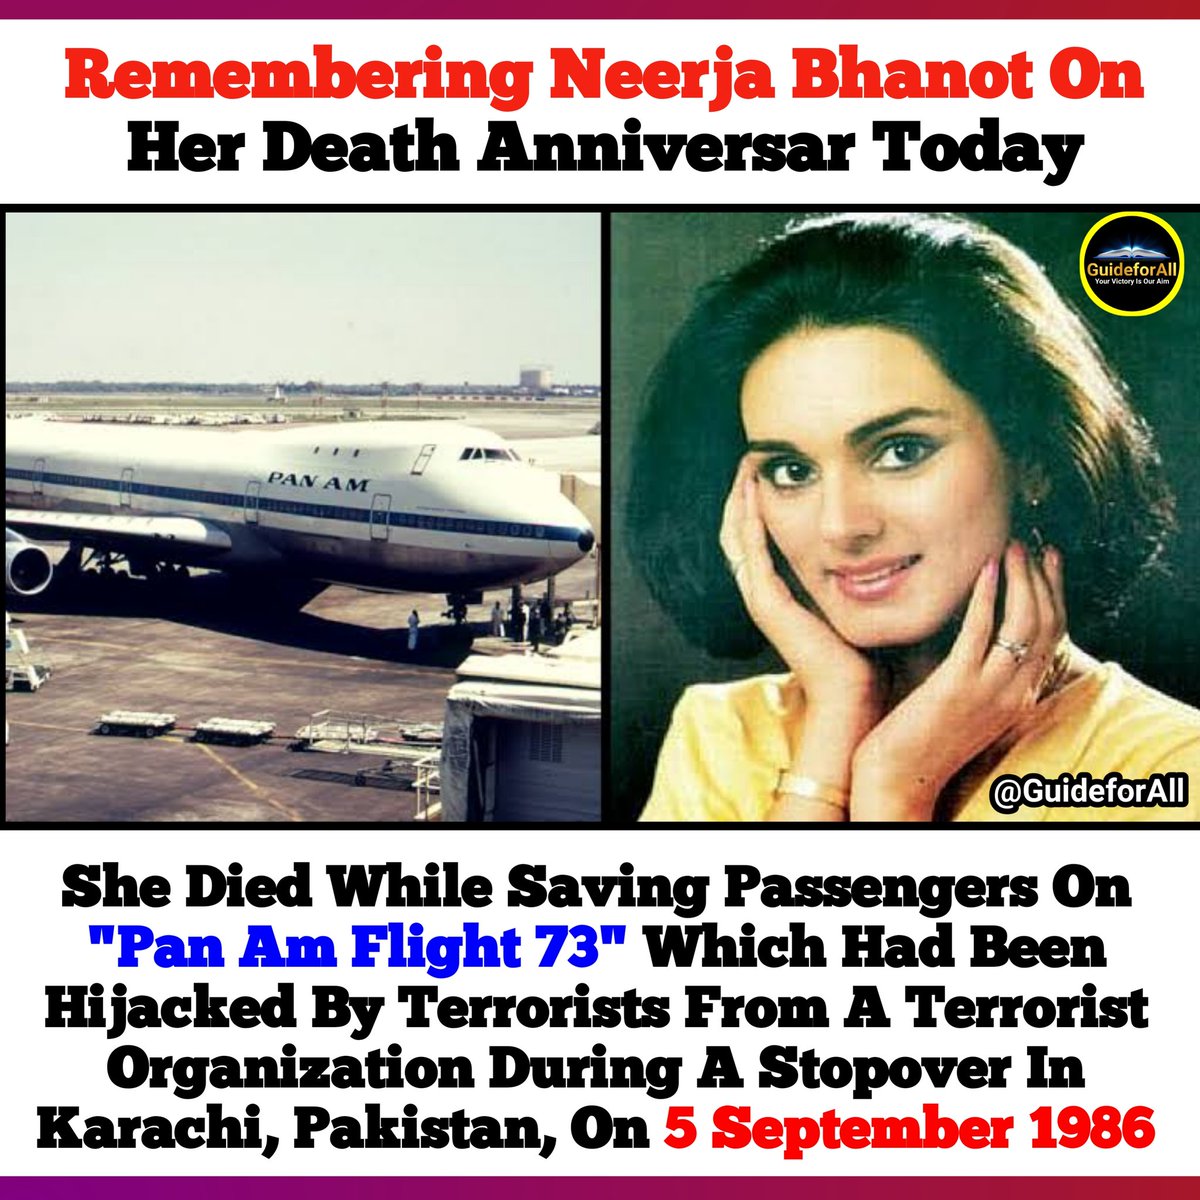 Sept 05: Remembering #NeerjaBhanot on her death anniversary today.